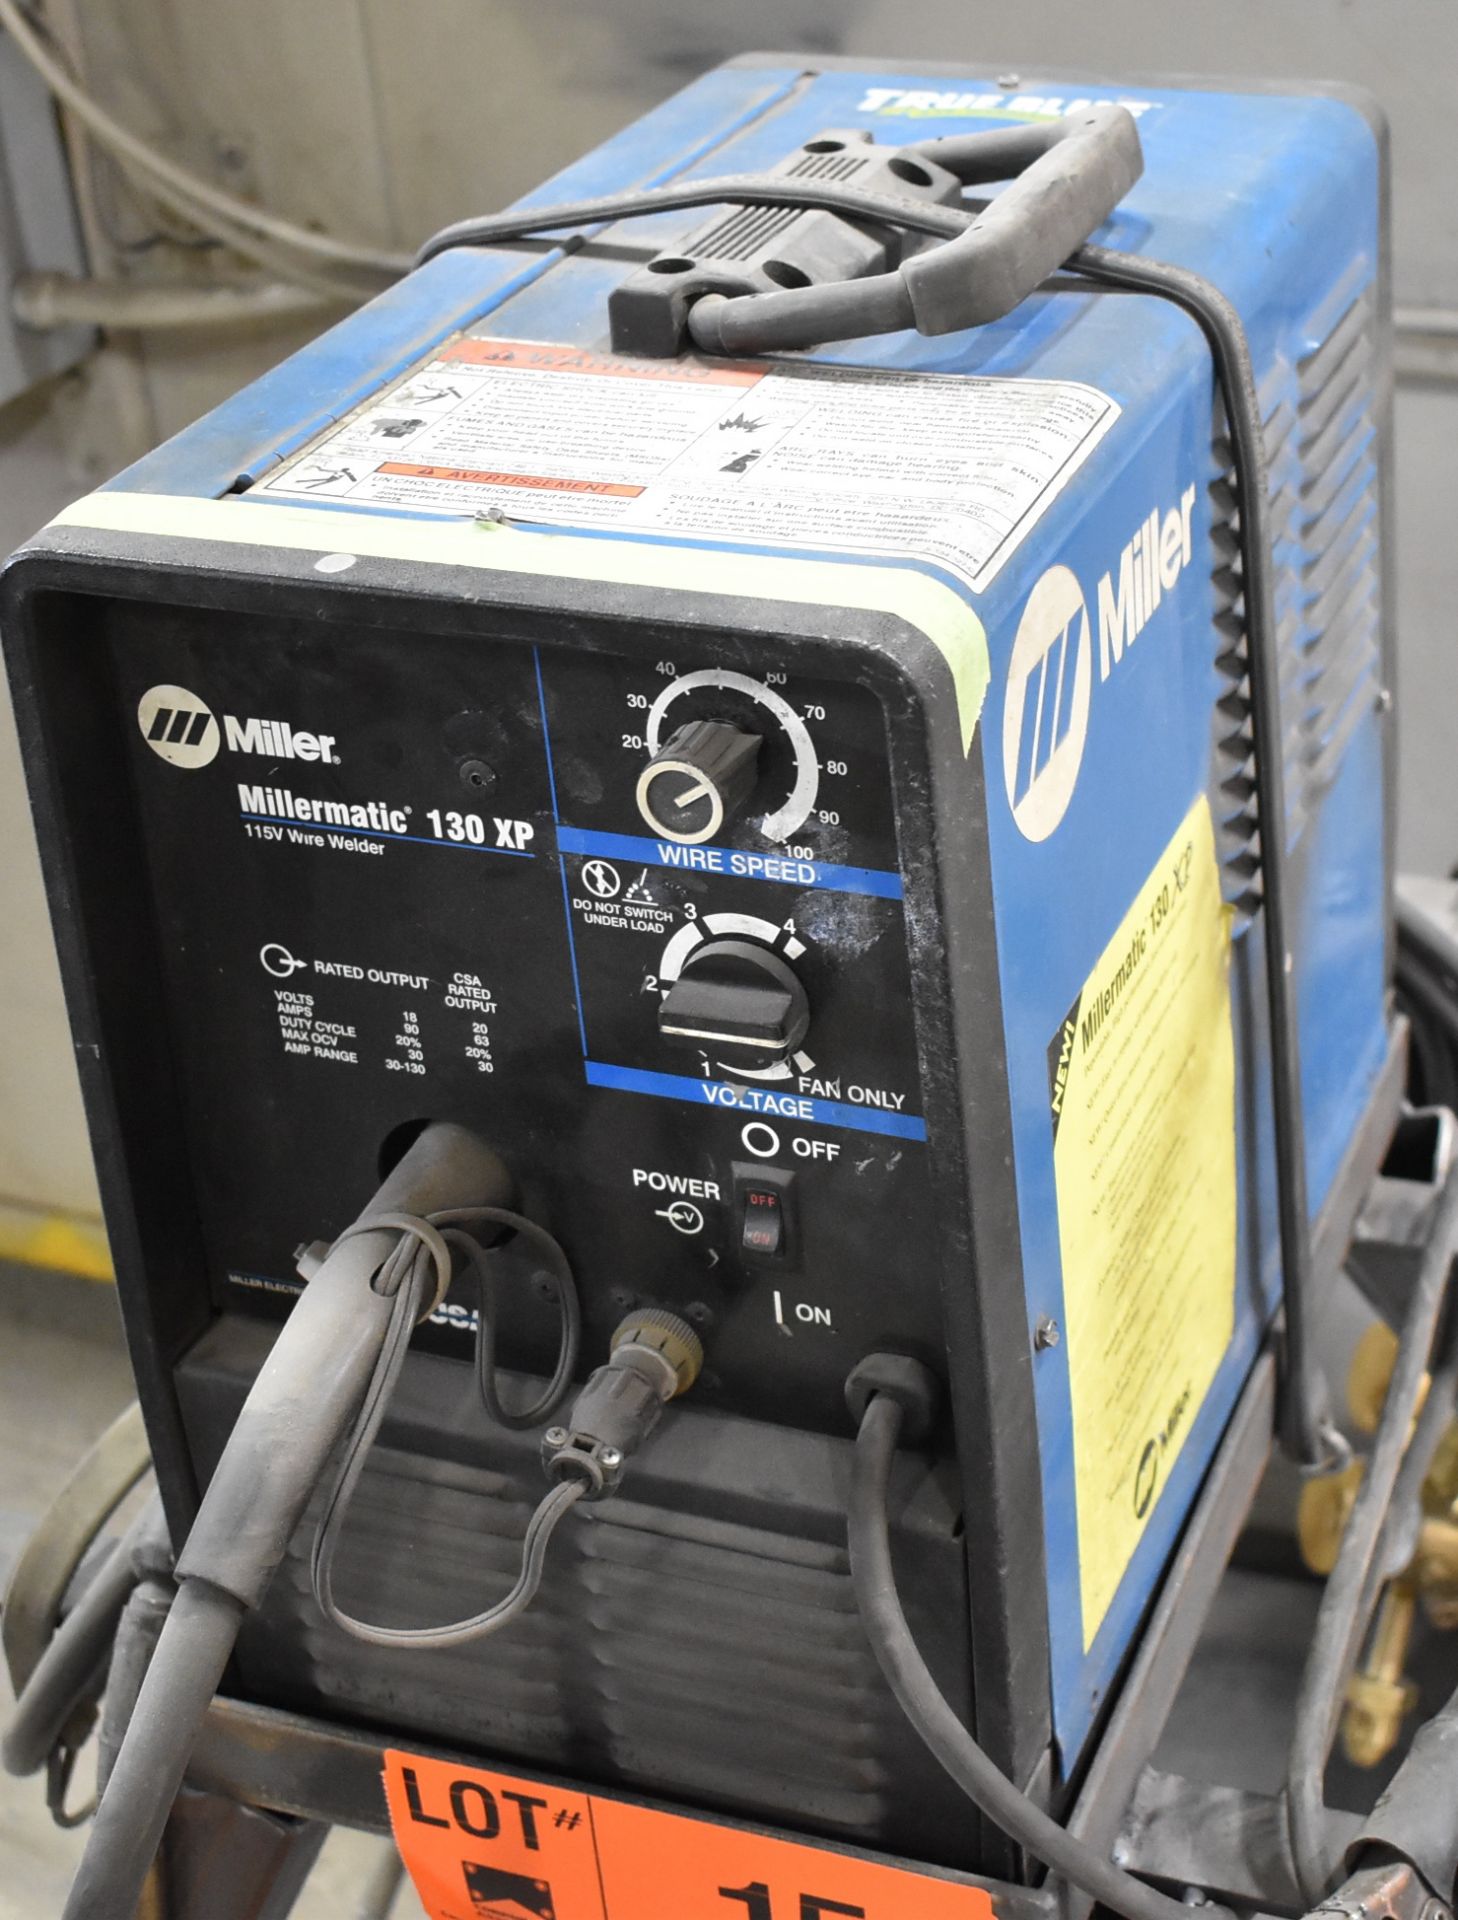 MILLER MILLERMATIC 130XP MIG WELDER WITH BUILT-IN WIRE FEEDER, CABLES & GUN, S/N: KH522720 - Image 2 of 5